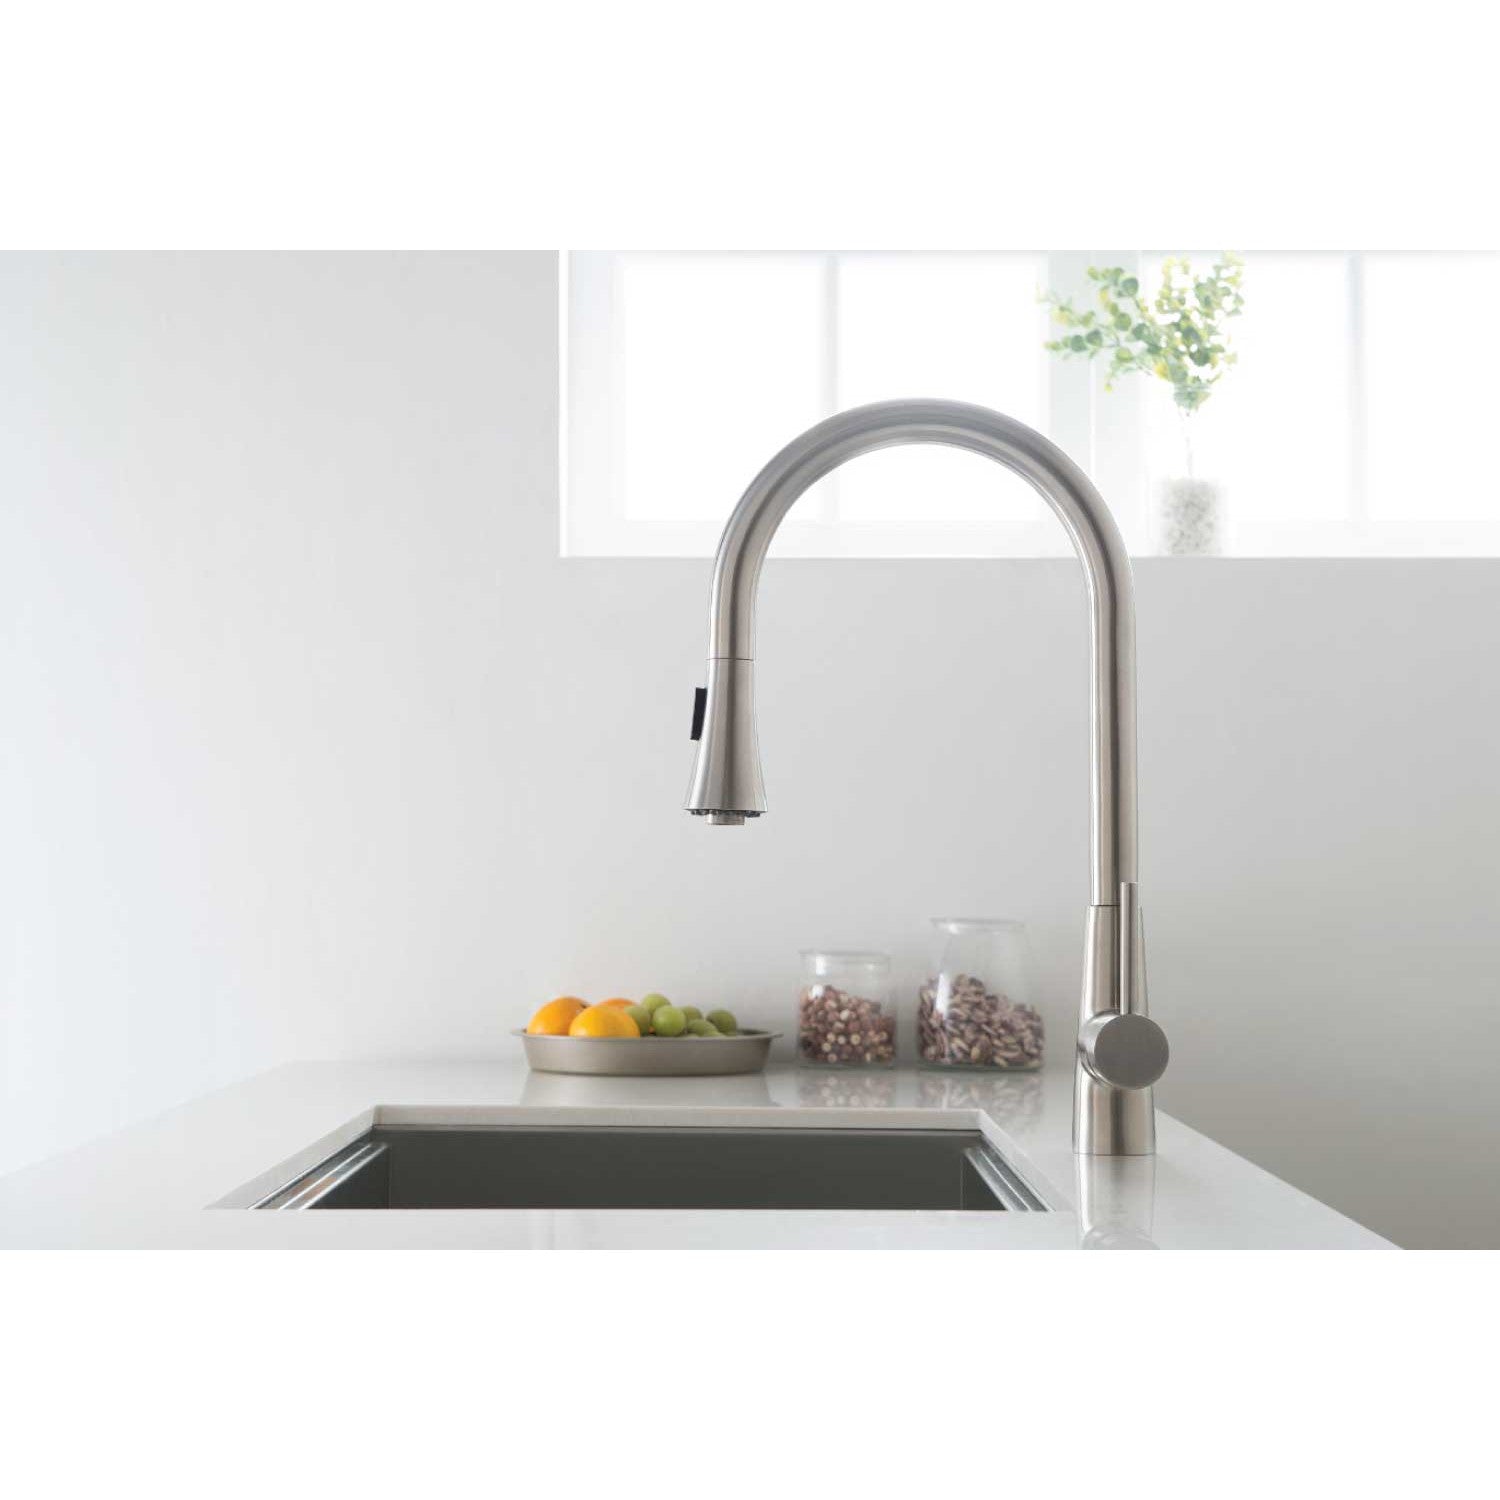 Isenberg Klassiker Zest 18" Single Hole Rock Gray Stainless Steel Pull-Down Kitchen Faucet With Dual Function Sprayer